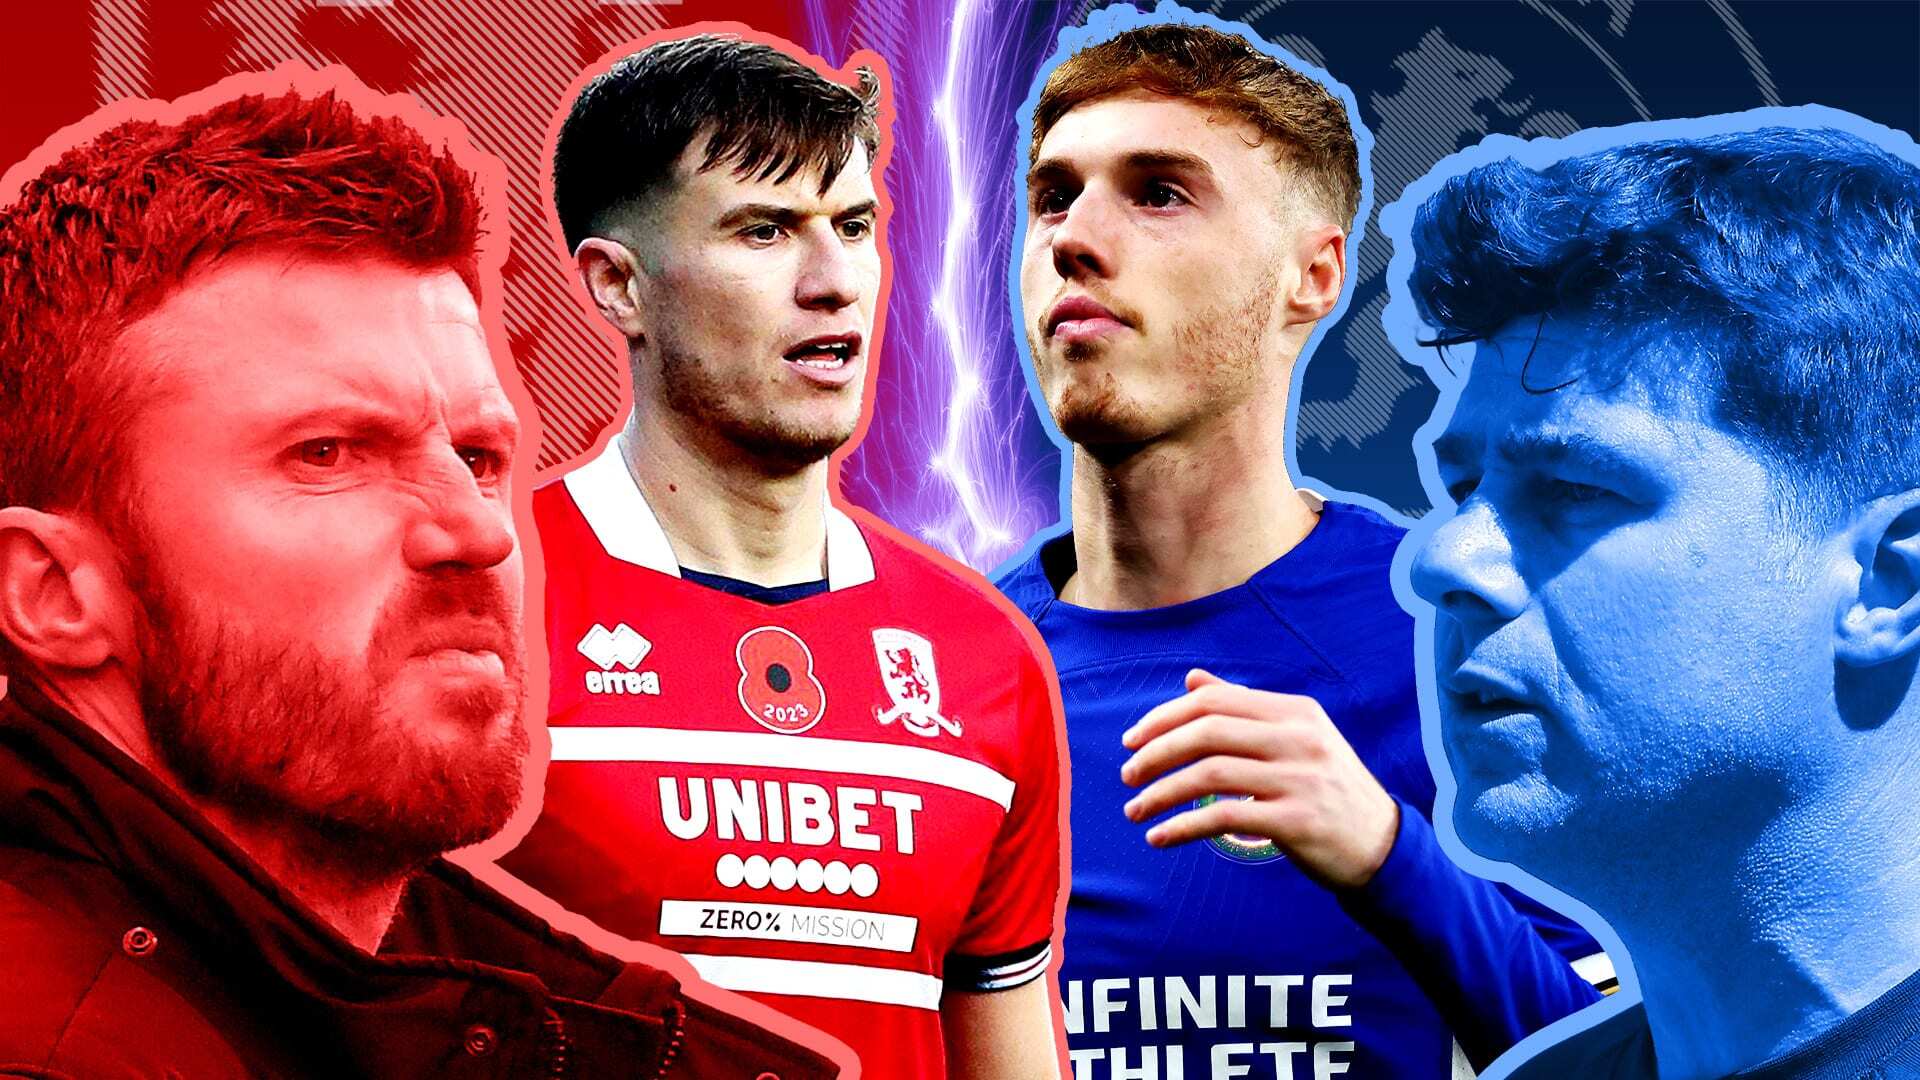 Middlesbrough vs Chelsea - Carabao Cup semi-final LIVE: Broja dropped for Madueke as Blues and Boro renew rivalry